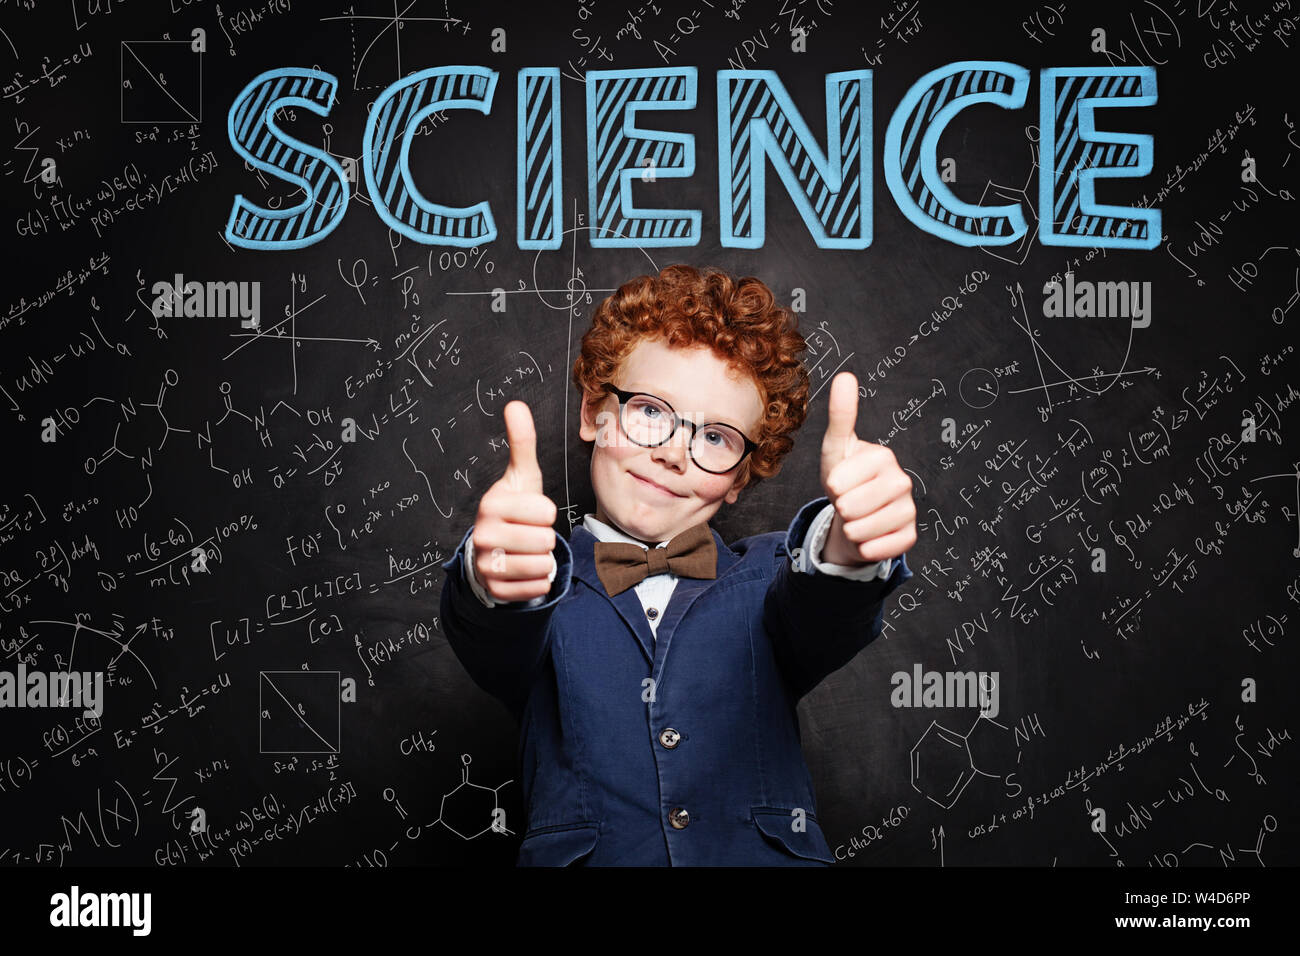 Happy kid pupil against science background Stock Photo